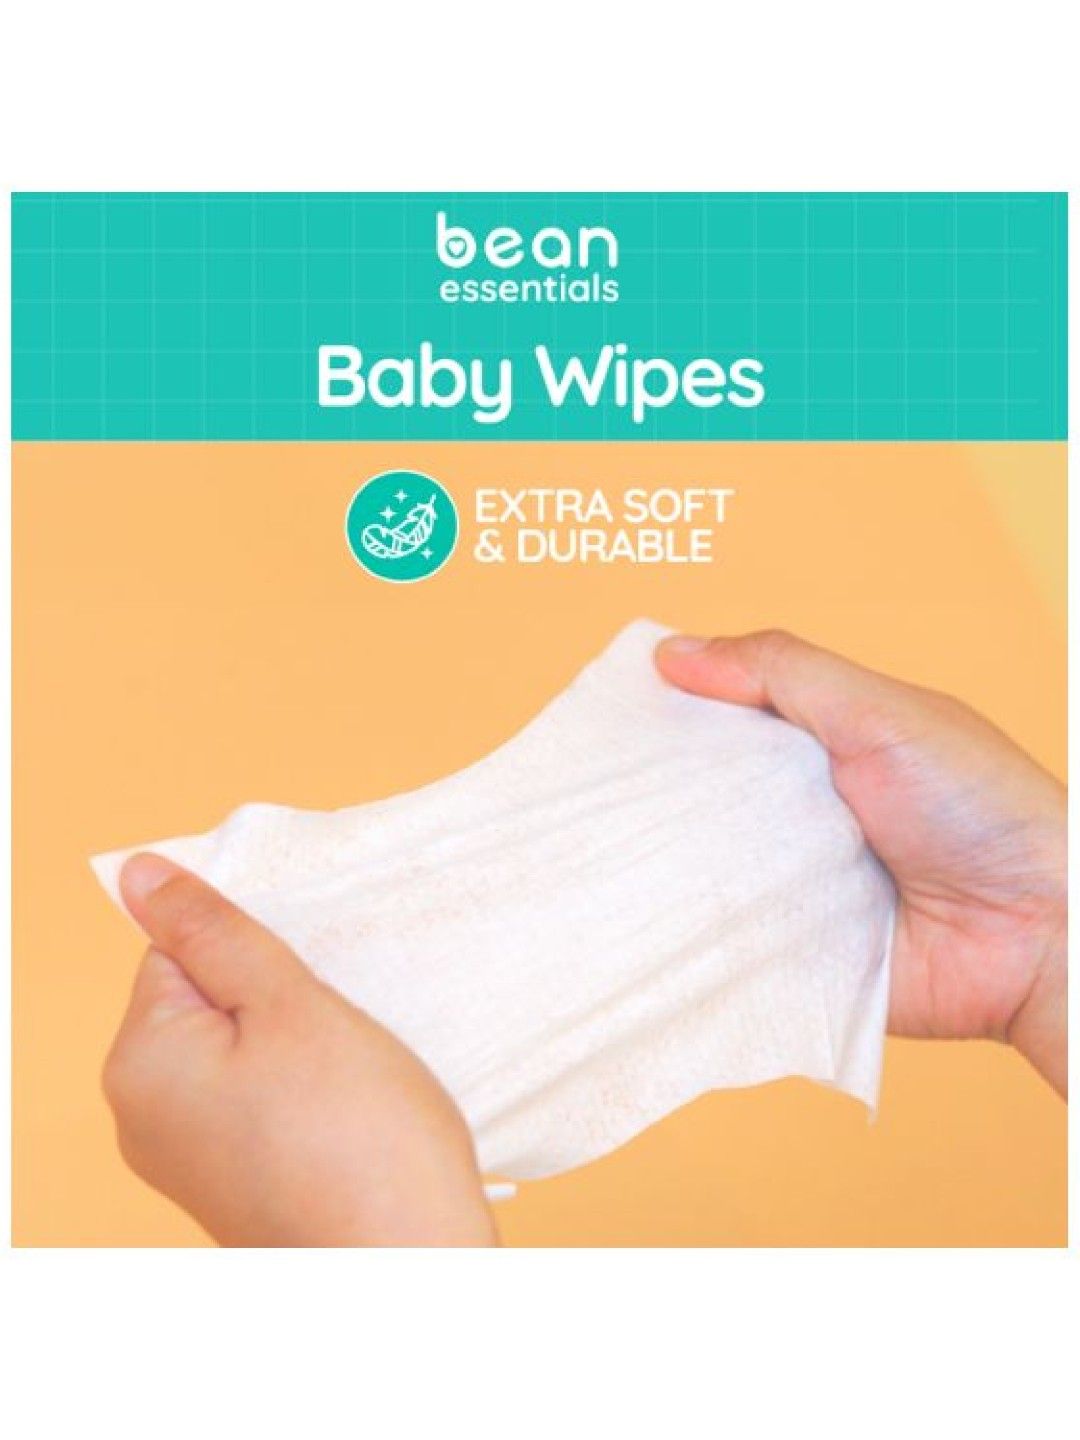 bean essentials Baby Wipes Fragrance Free 100 sheets (No Color- Image 3)